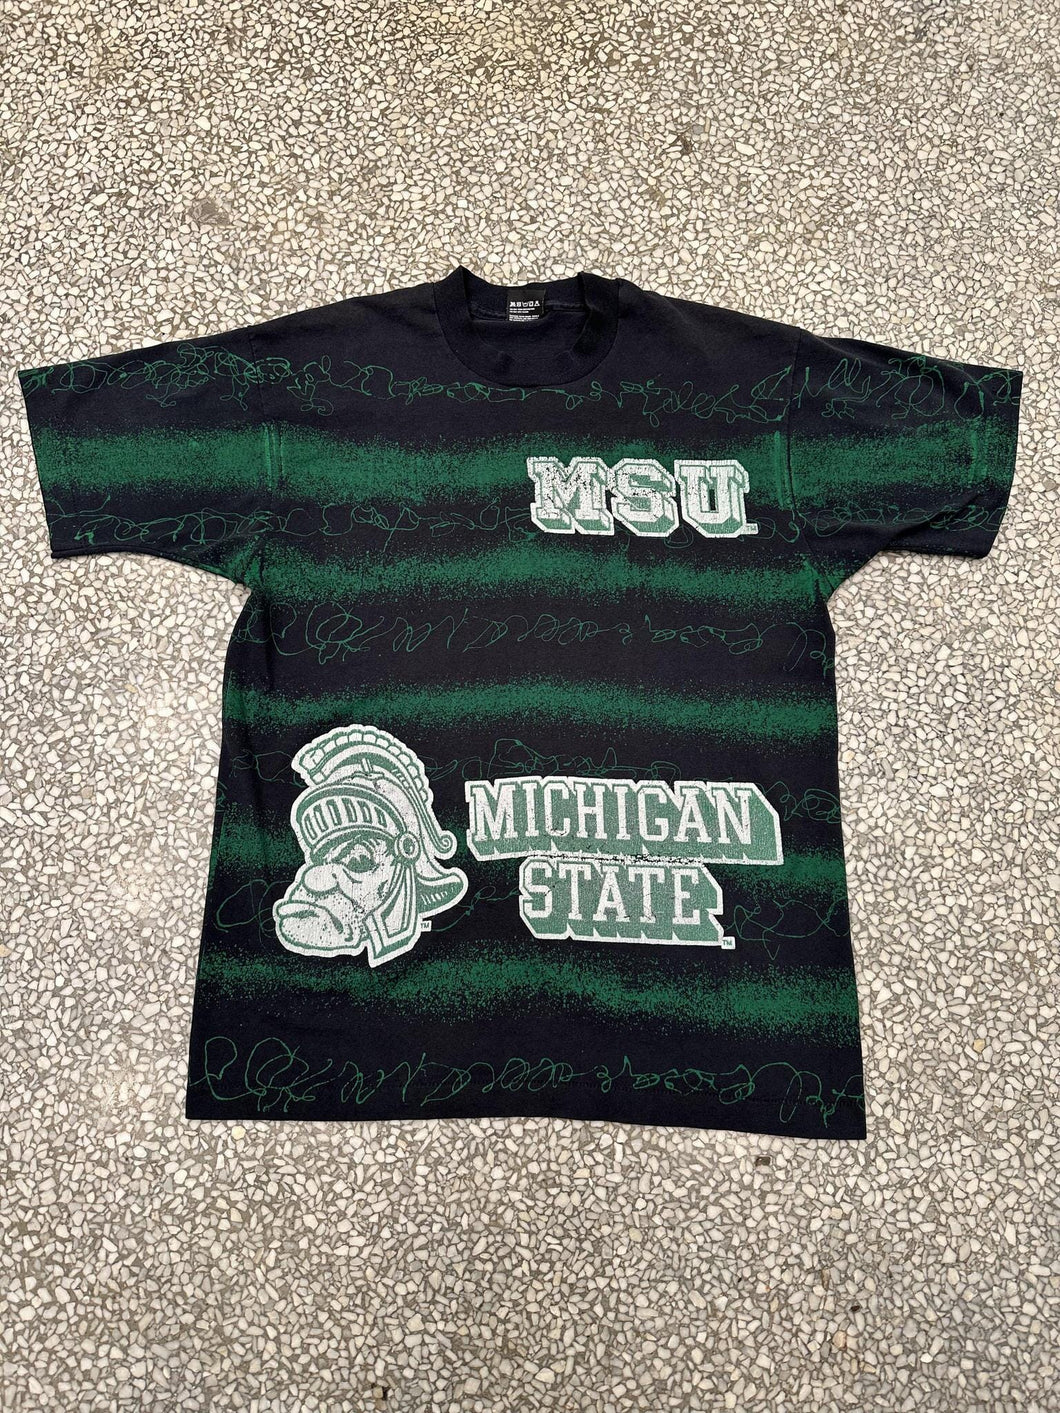 Michigan State Spartans Vintage 90s Screen Stars Best Tee Black Green Faded ABC Vintage 